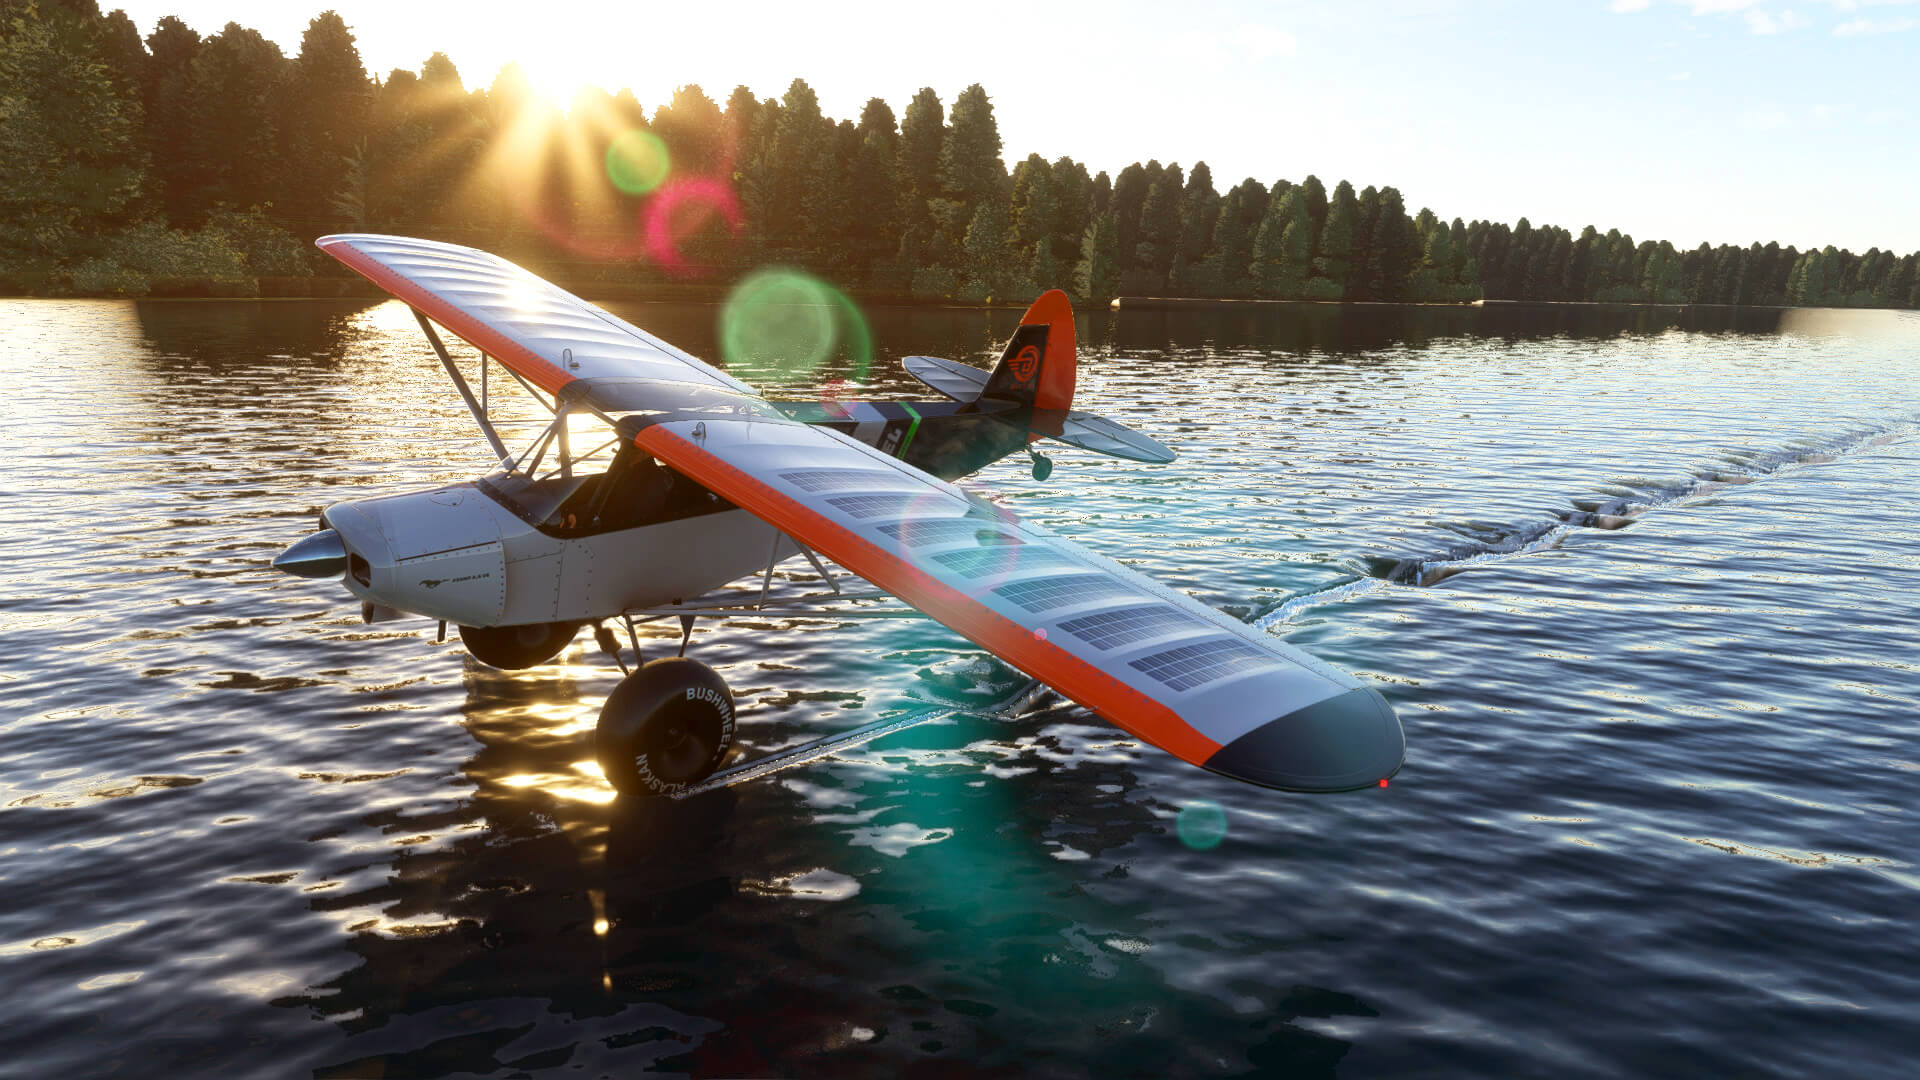 A bush plane makes light contact with the water on its left landing gear, and leaves a trail behind, with the sun shining through trees behind.